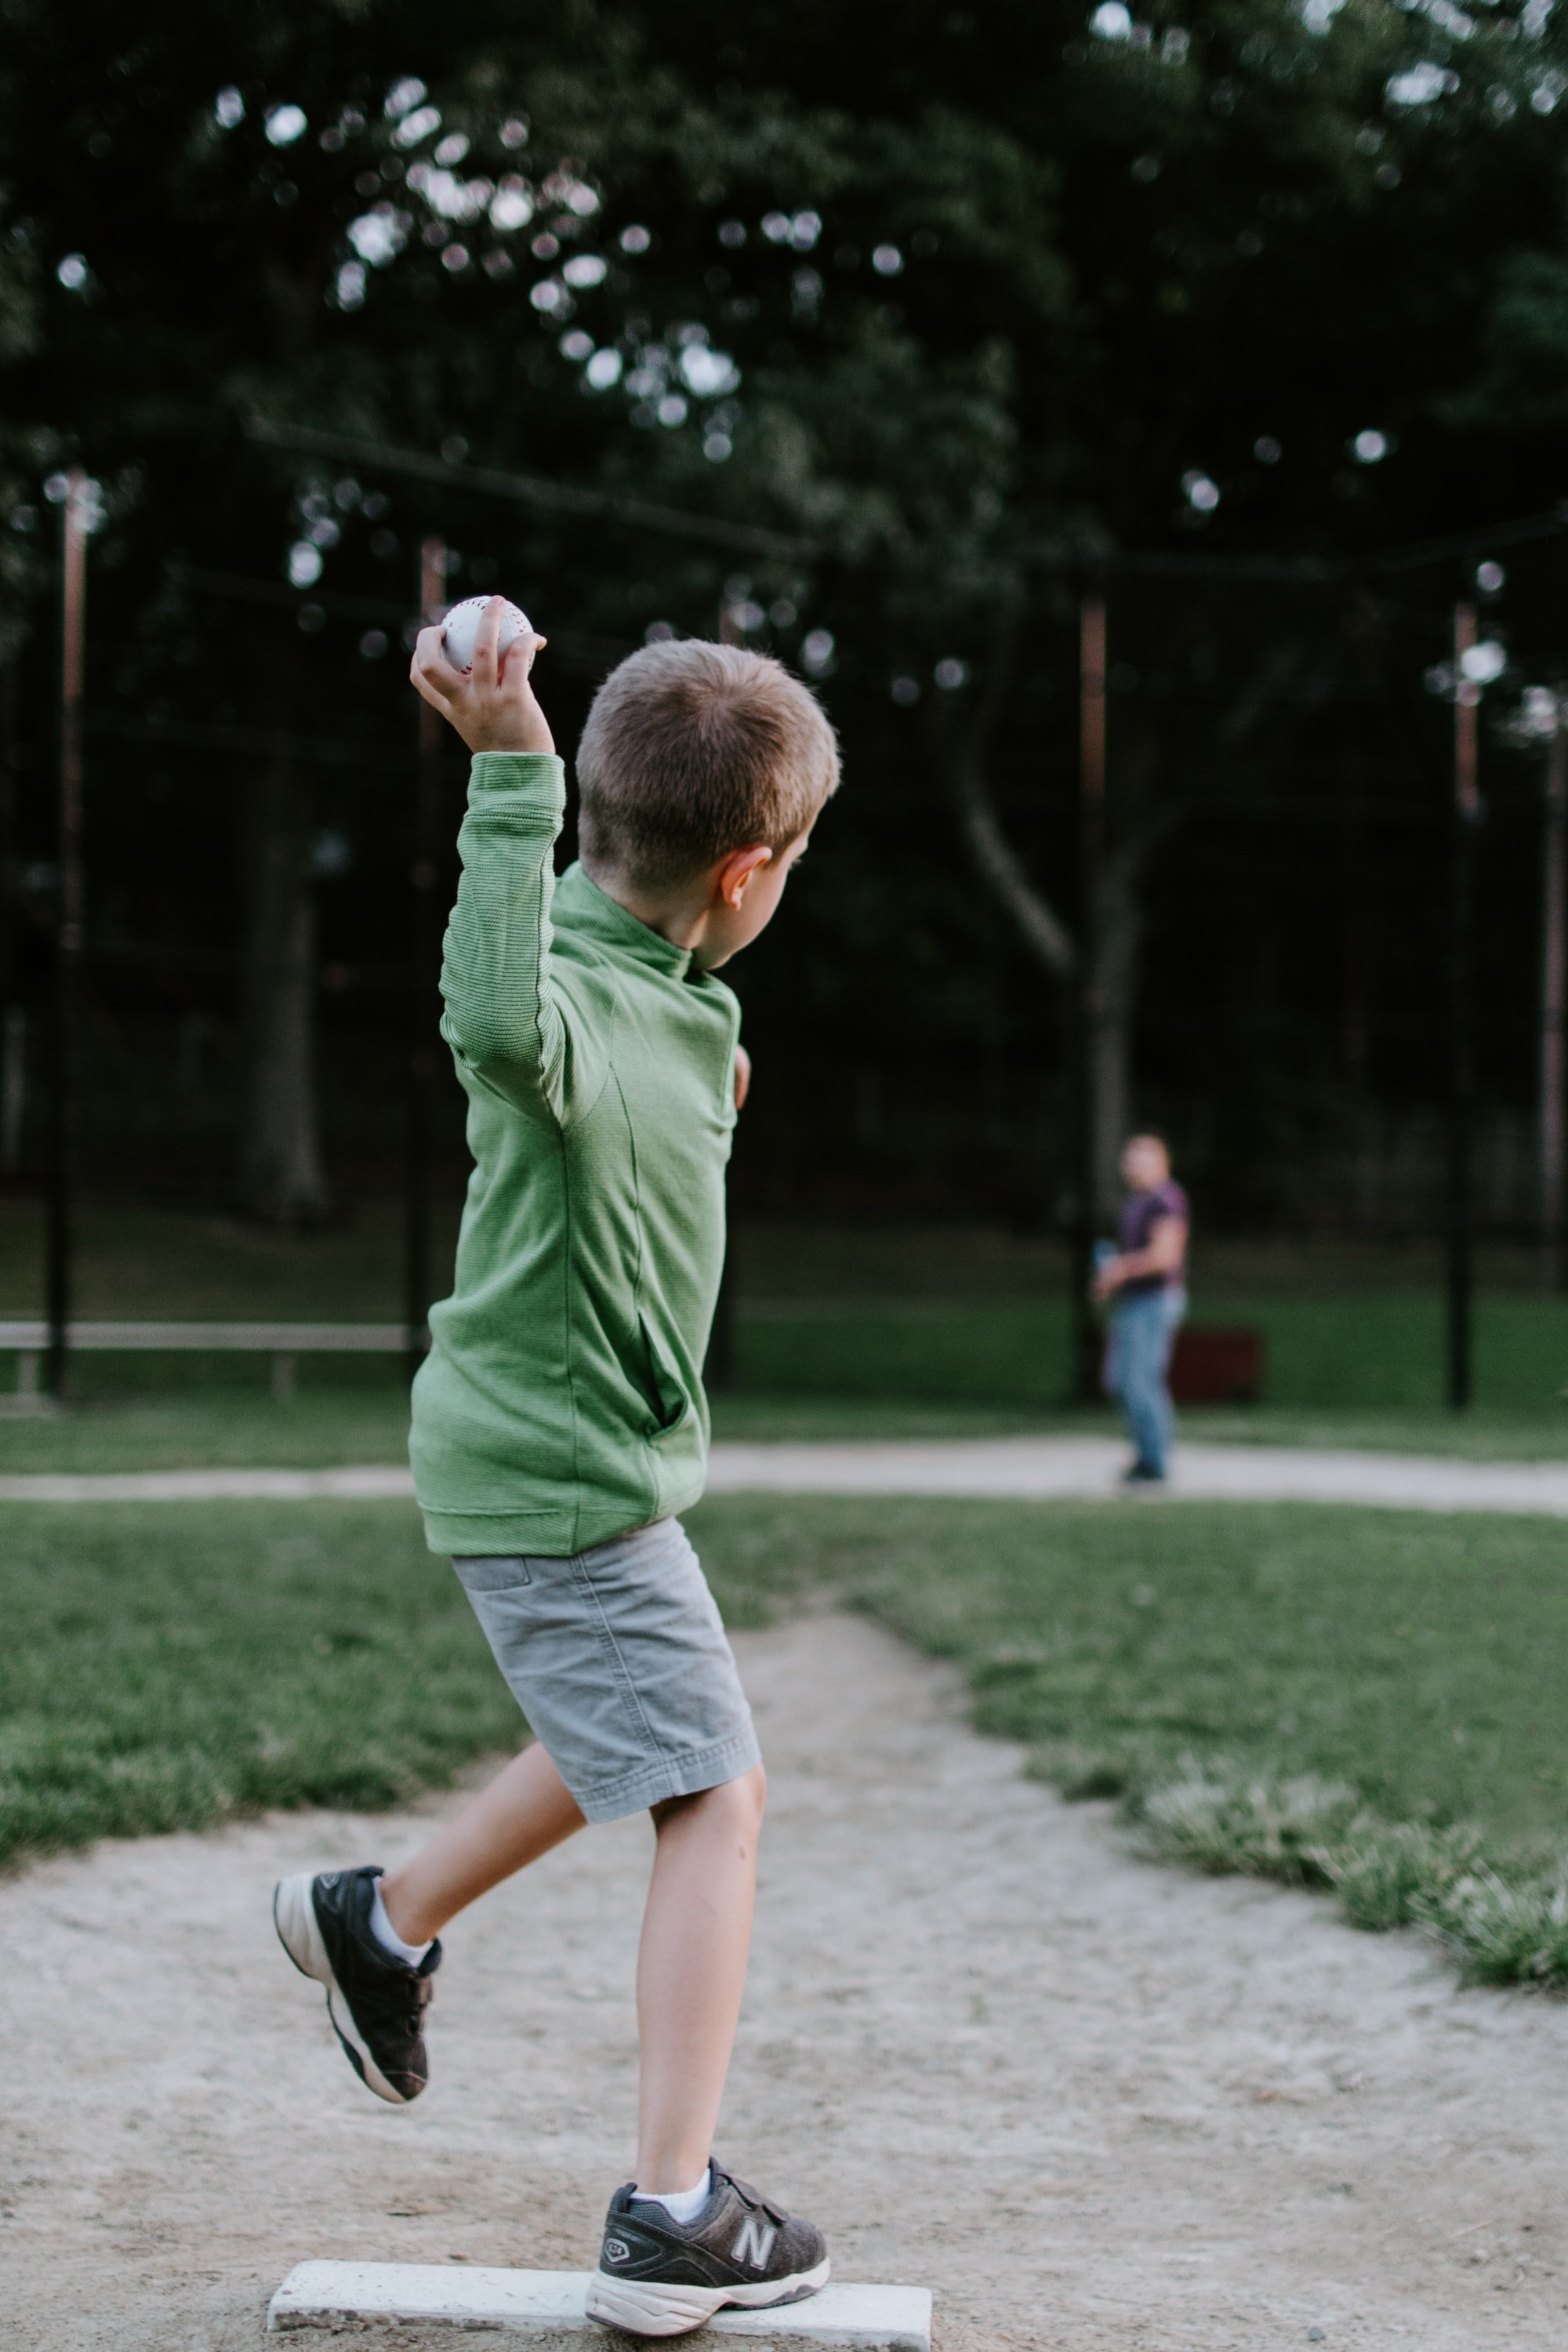 Gerald saw a group of poor kids playing baseball in the park. | Source: Unsplash